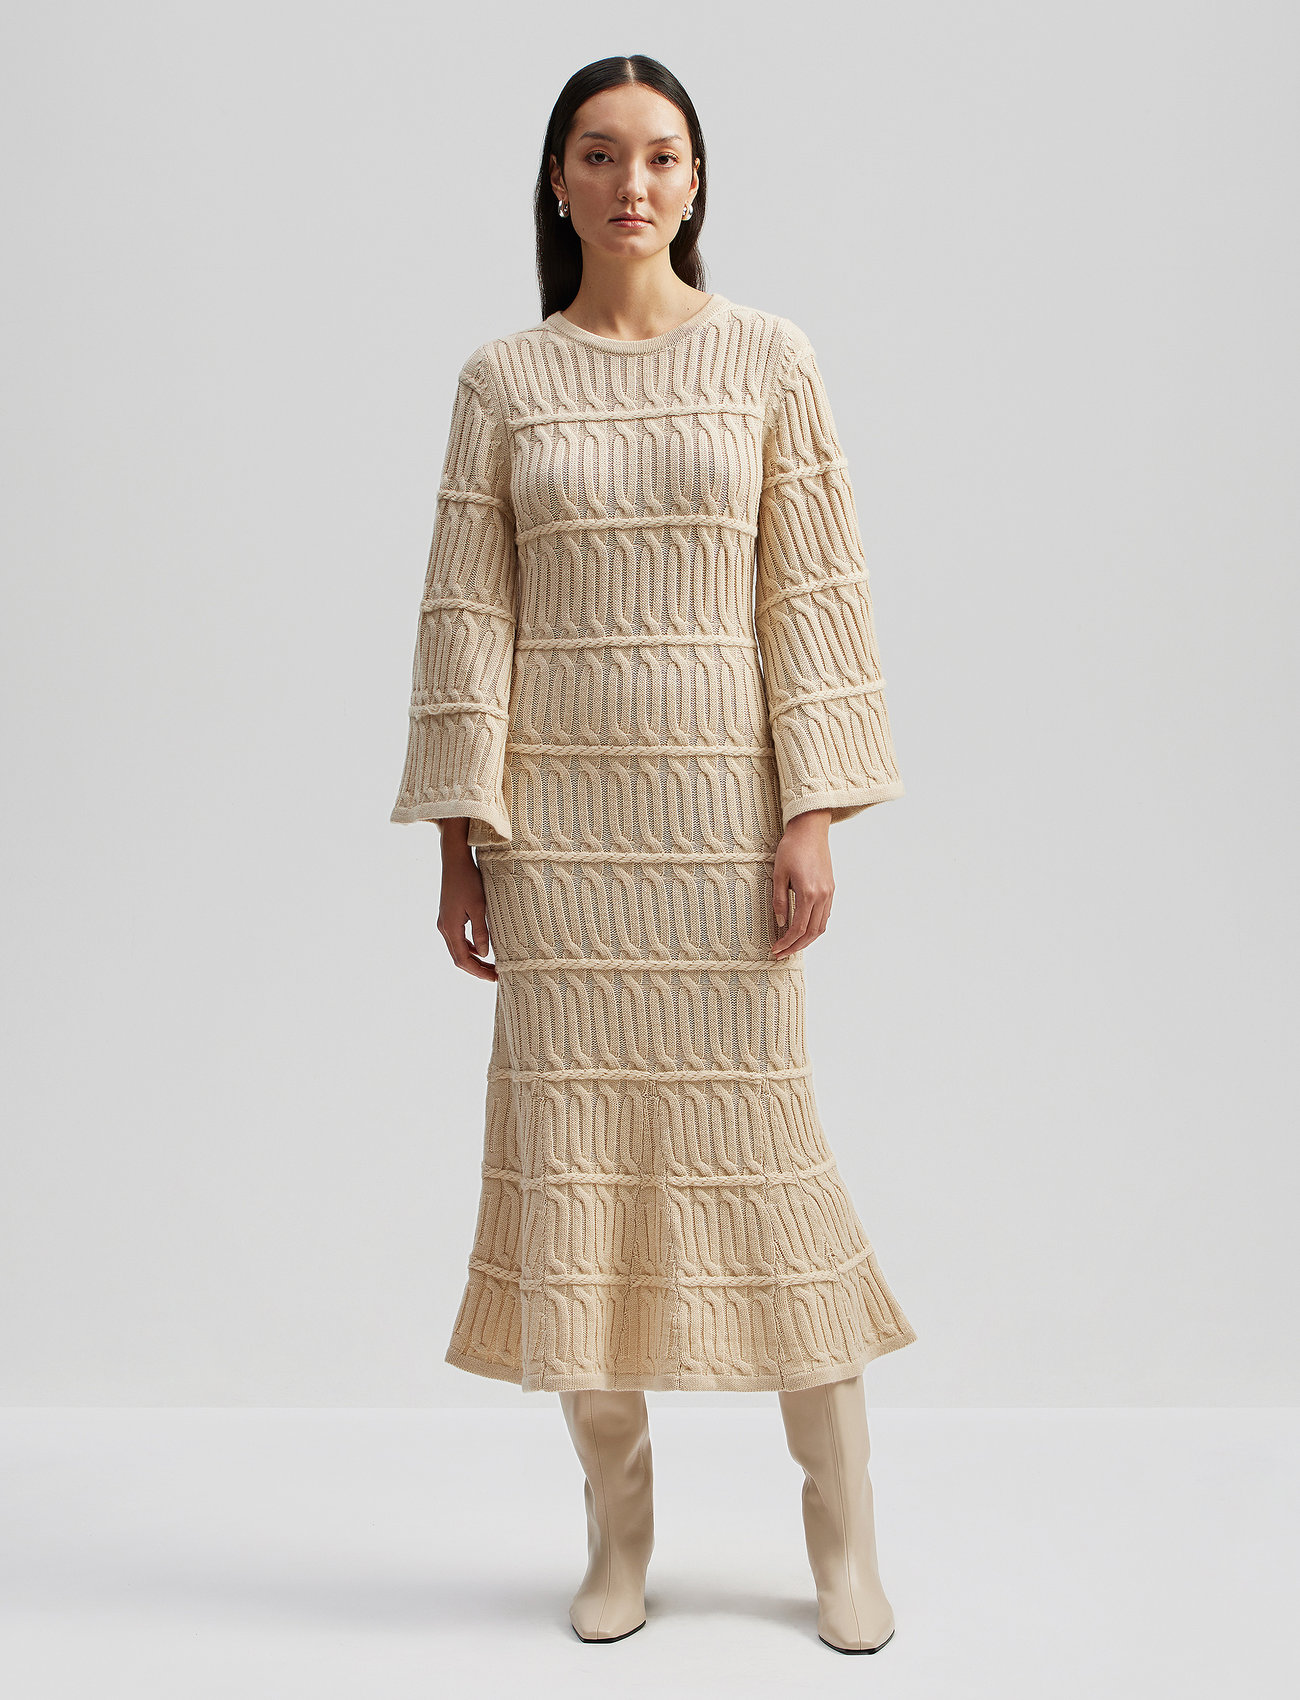 Malina - Elinne cable knitted maxi dress - knitted dresses - beige - 1